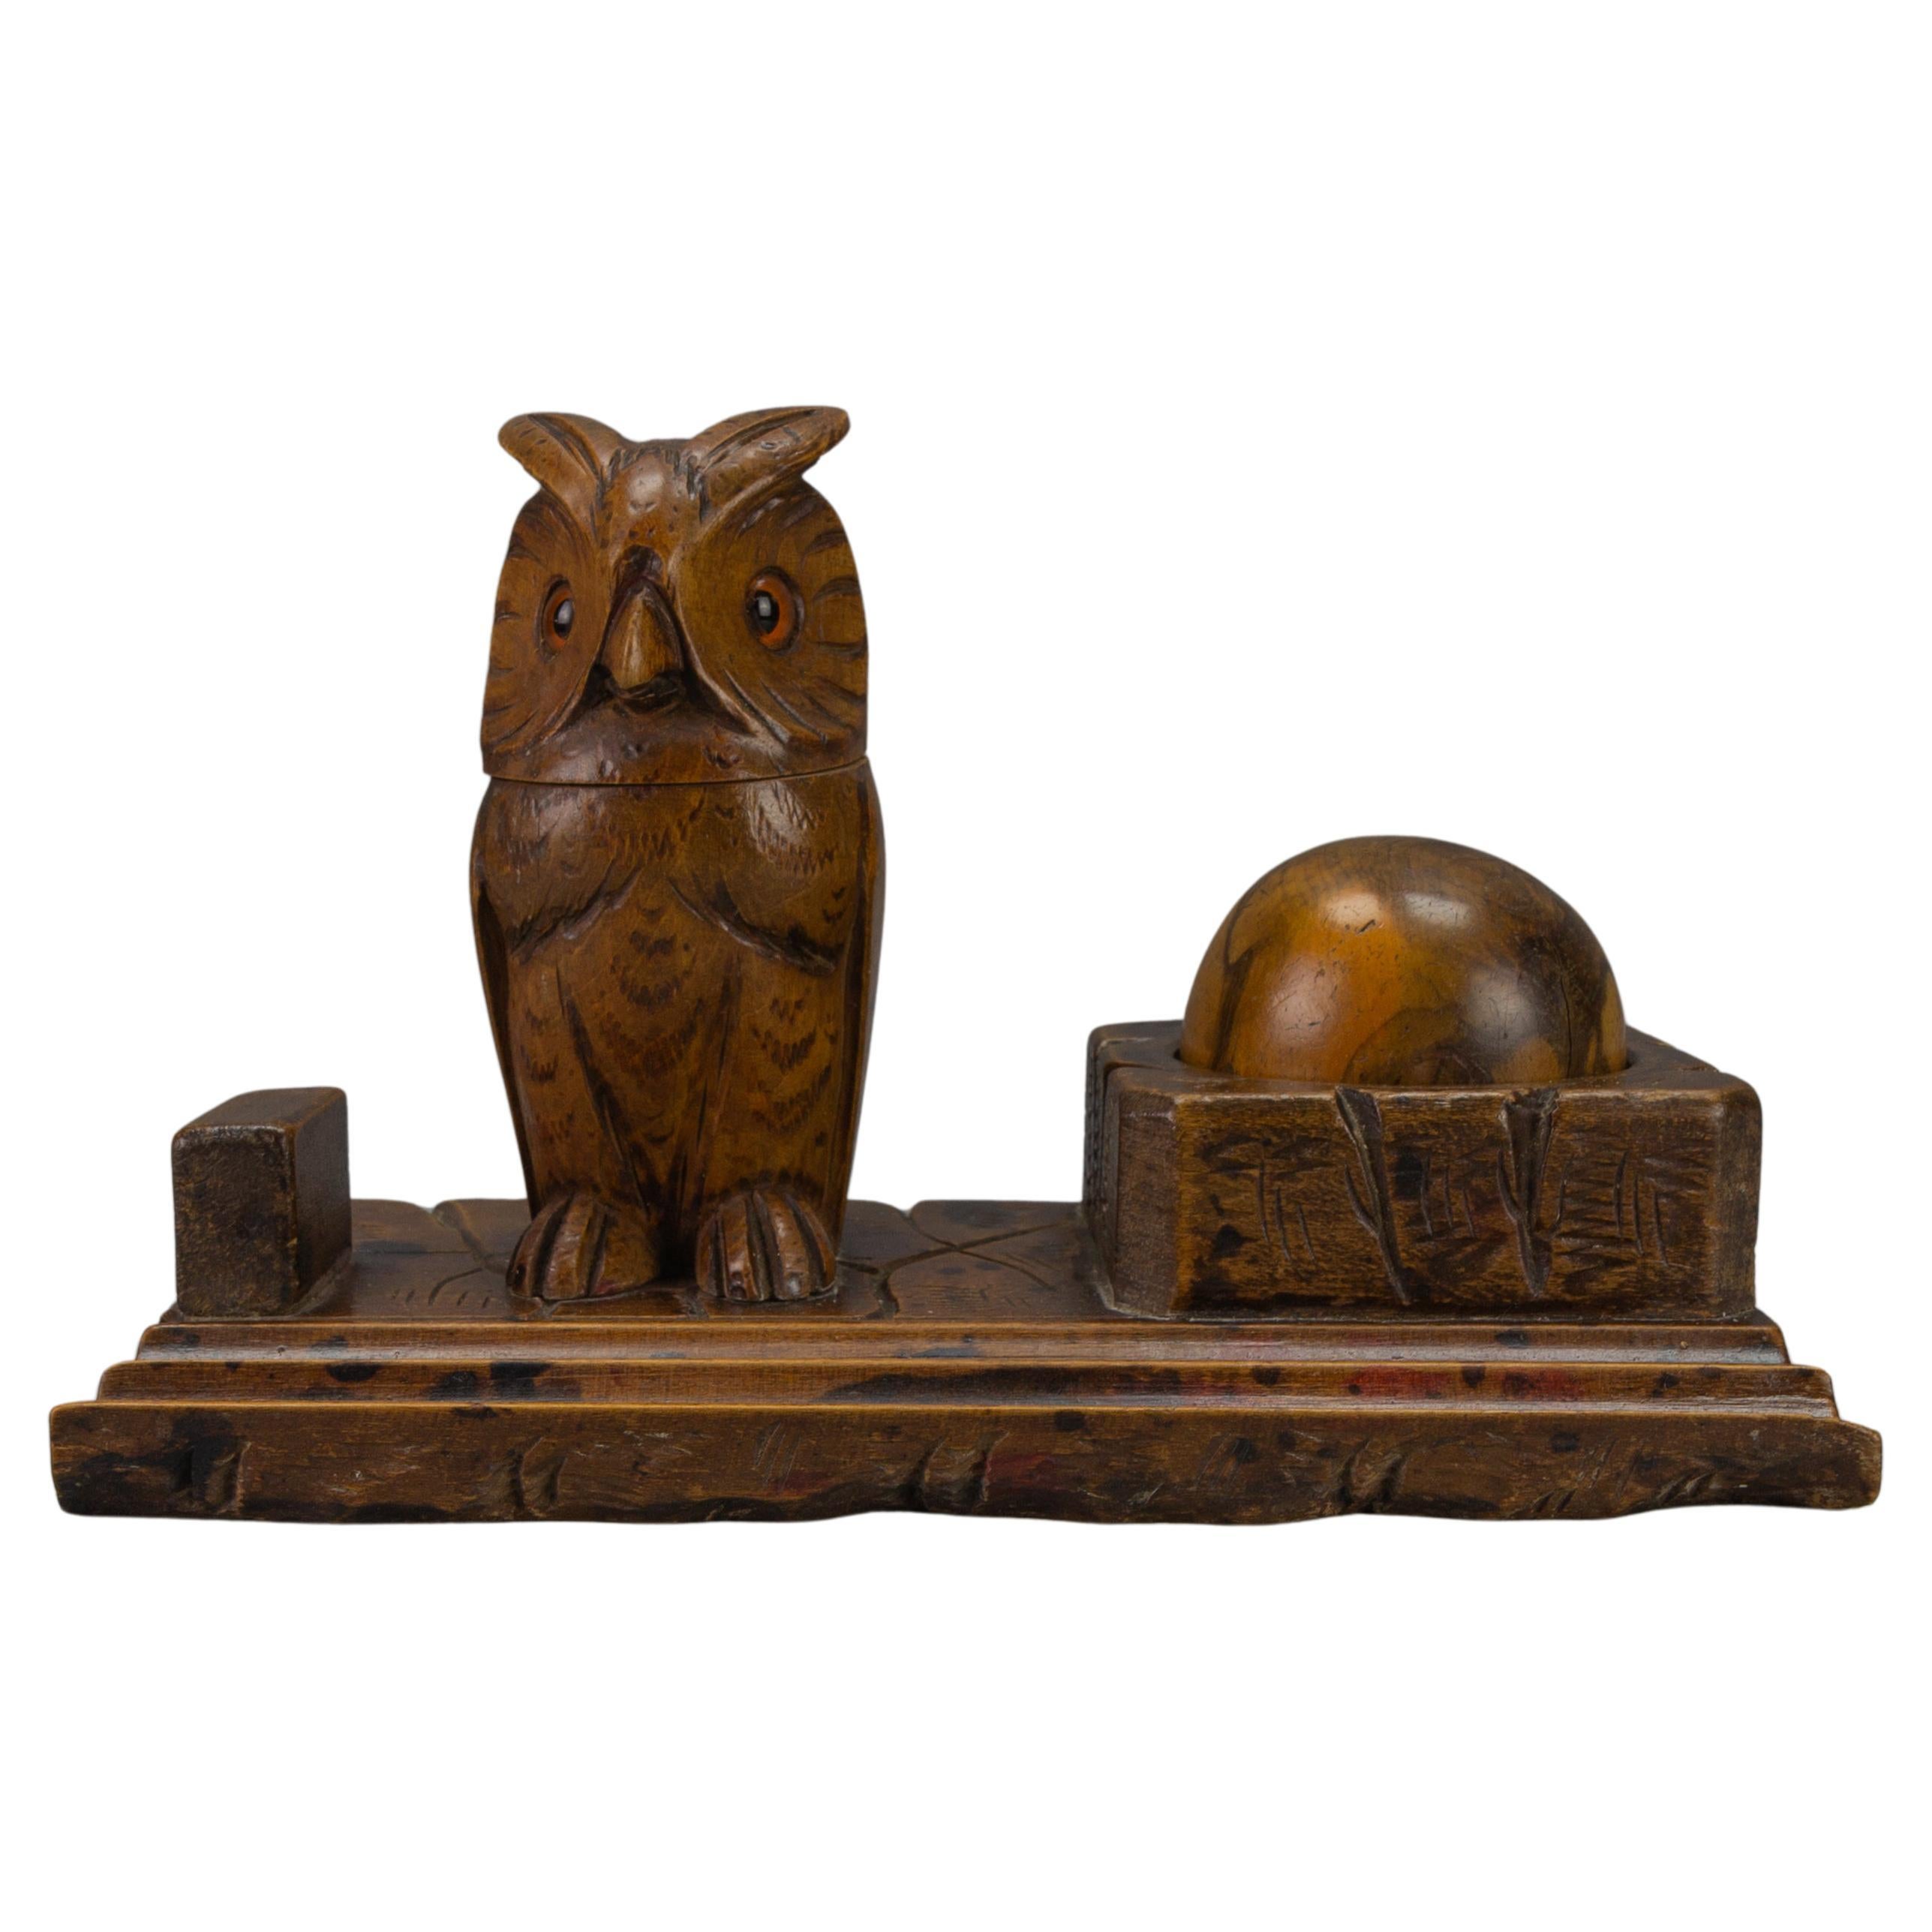 Hand-Carved Wooden Inkwell or Pen Stand with Owl Figure, 1920s